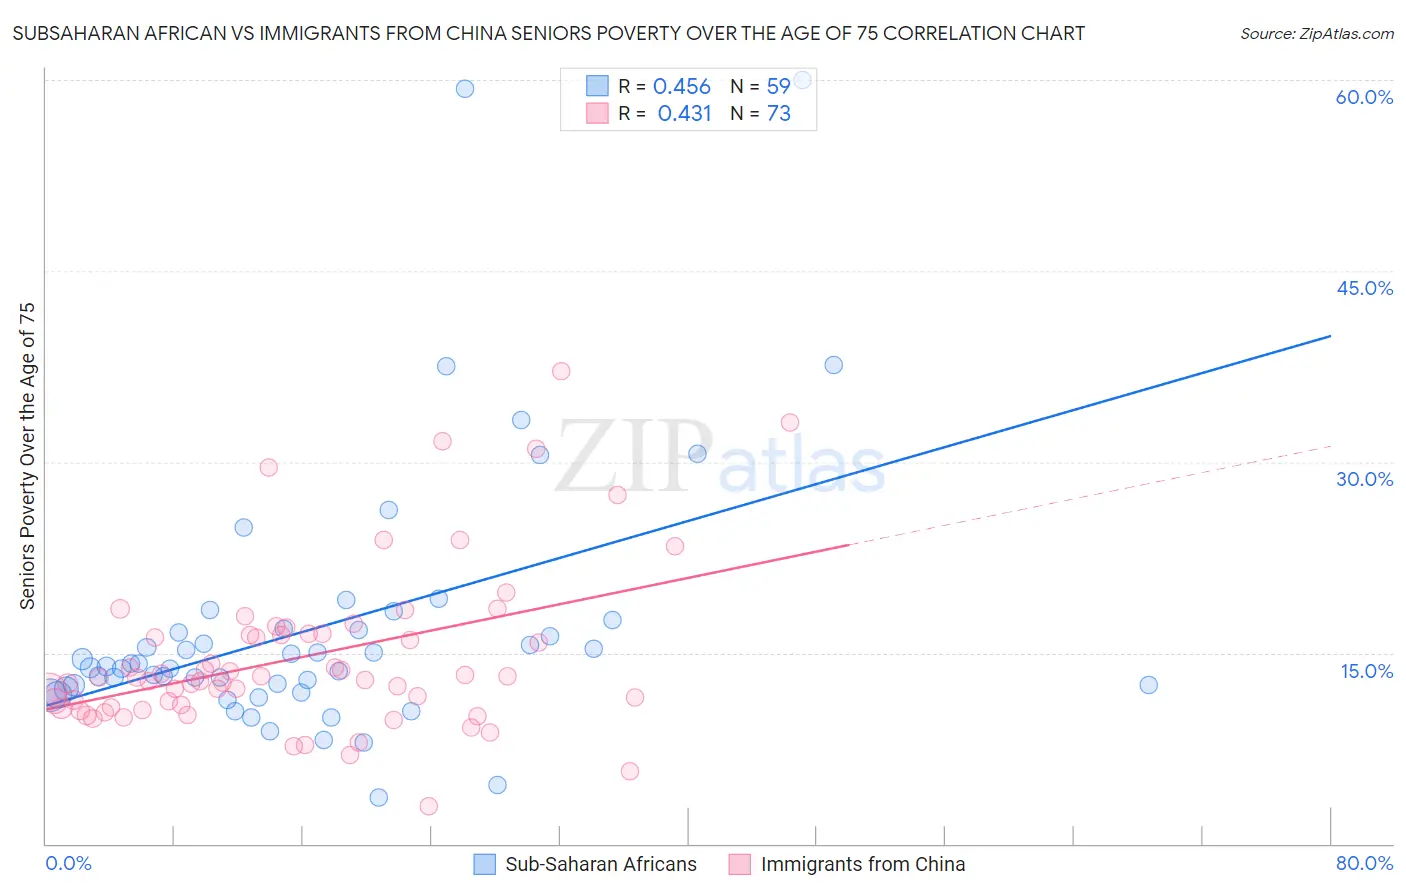 Subsaharan African vs Immigrants from China Seniors Poverty Over the Age of 75